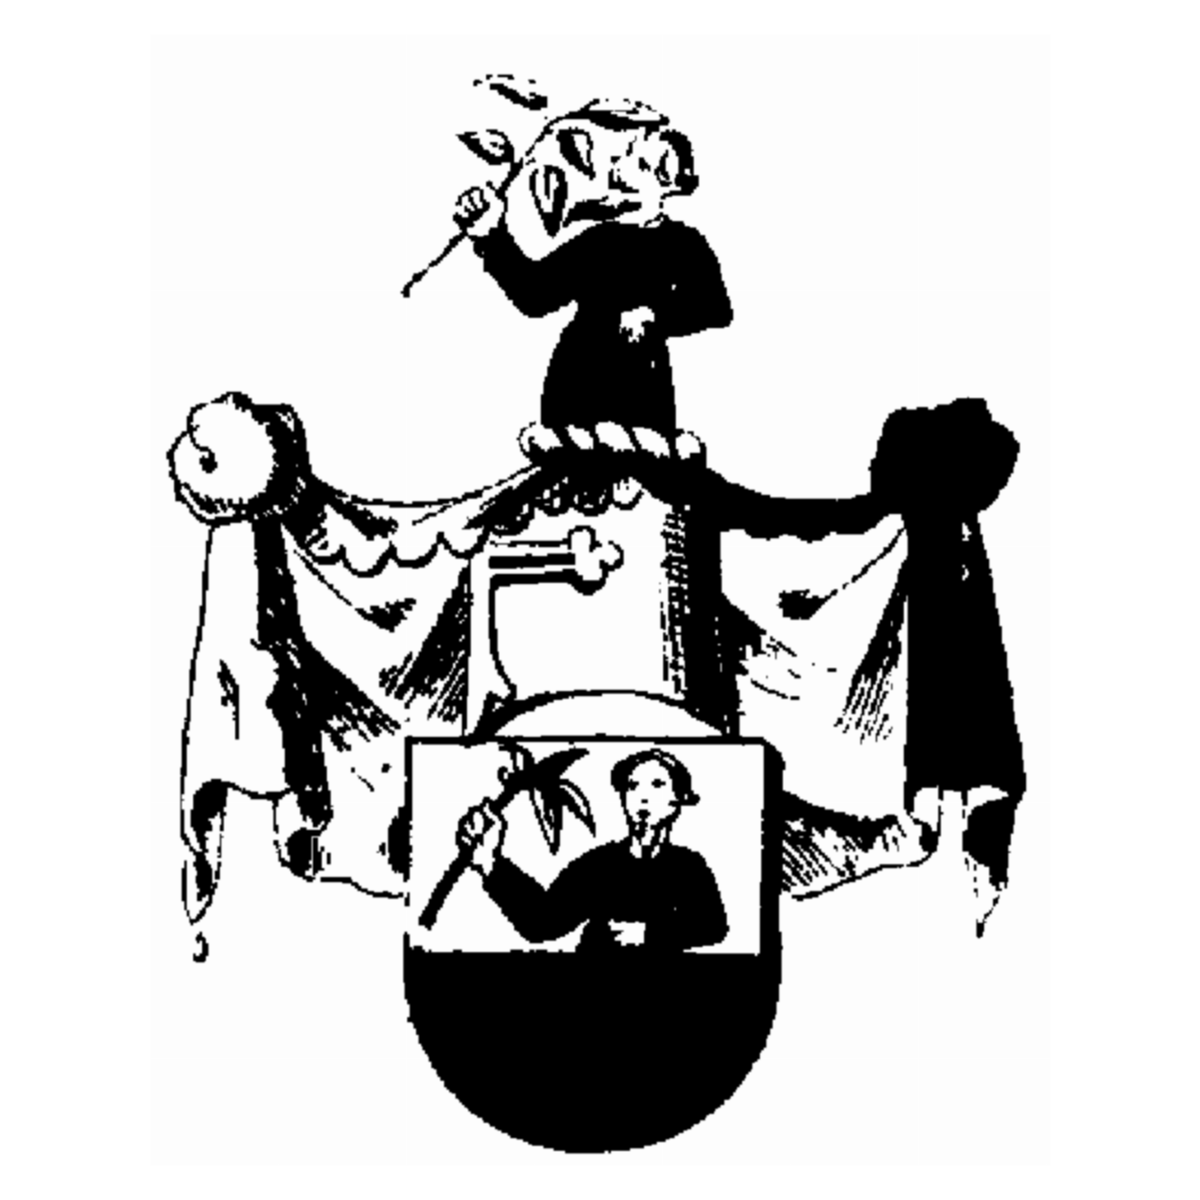 Coat of arms of family Vale